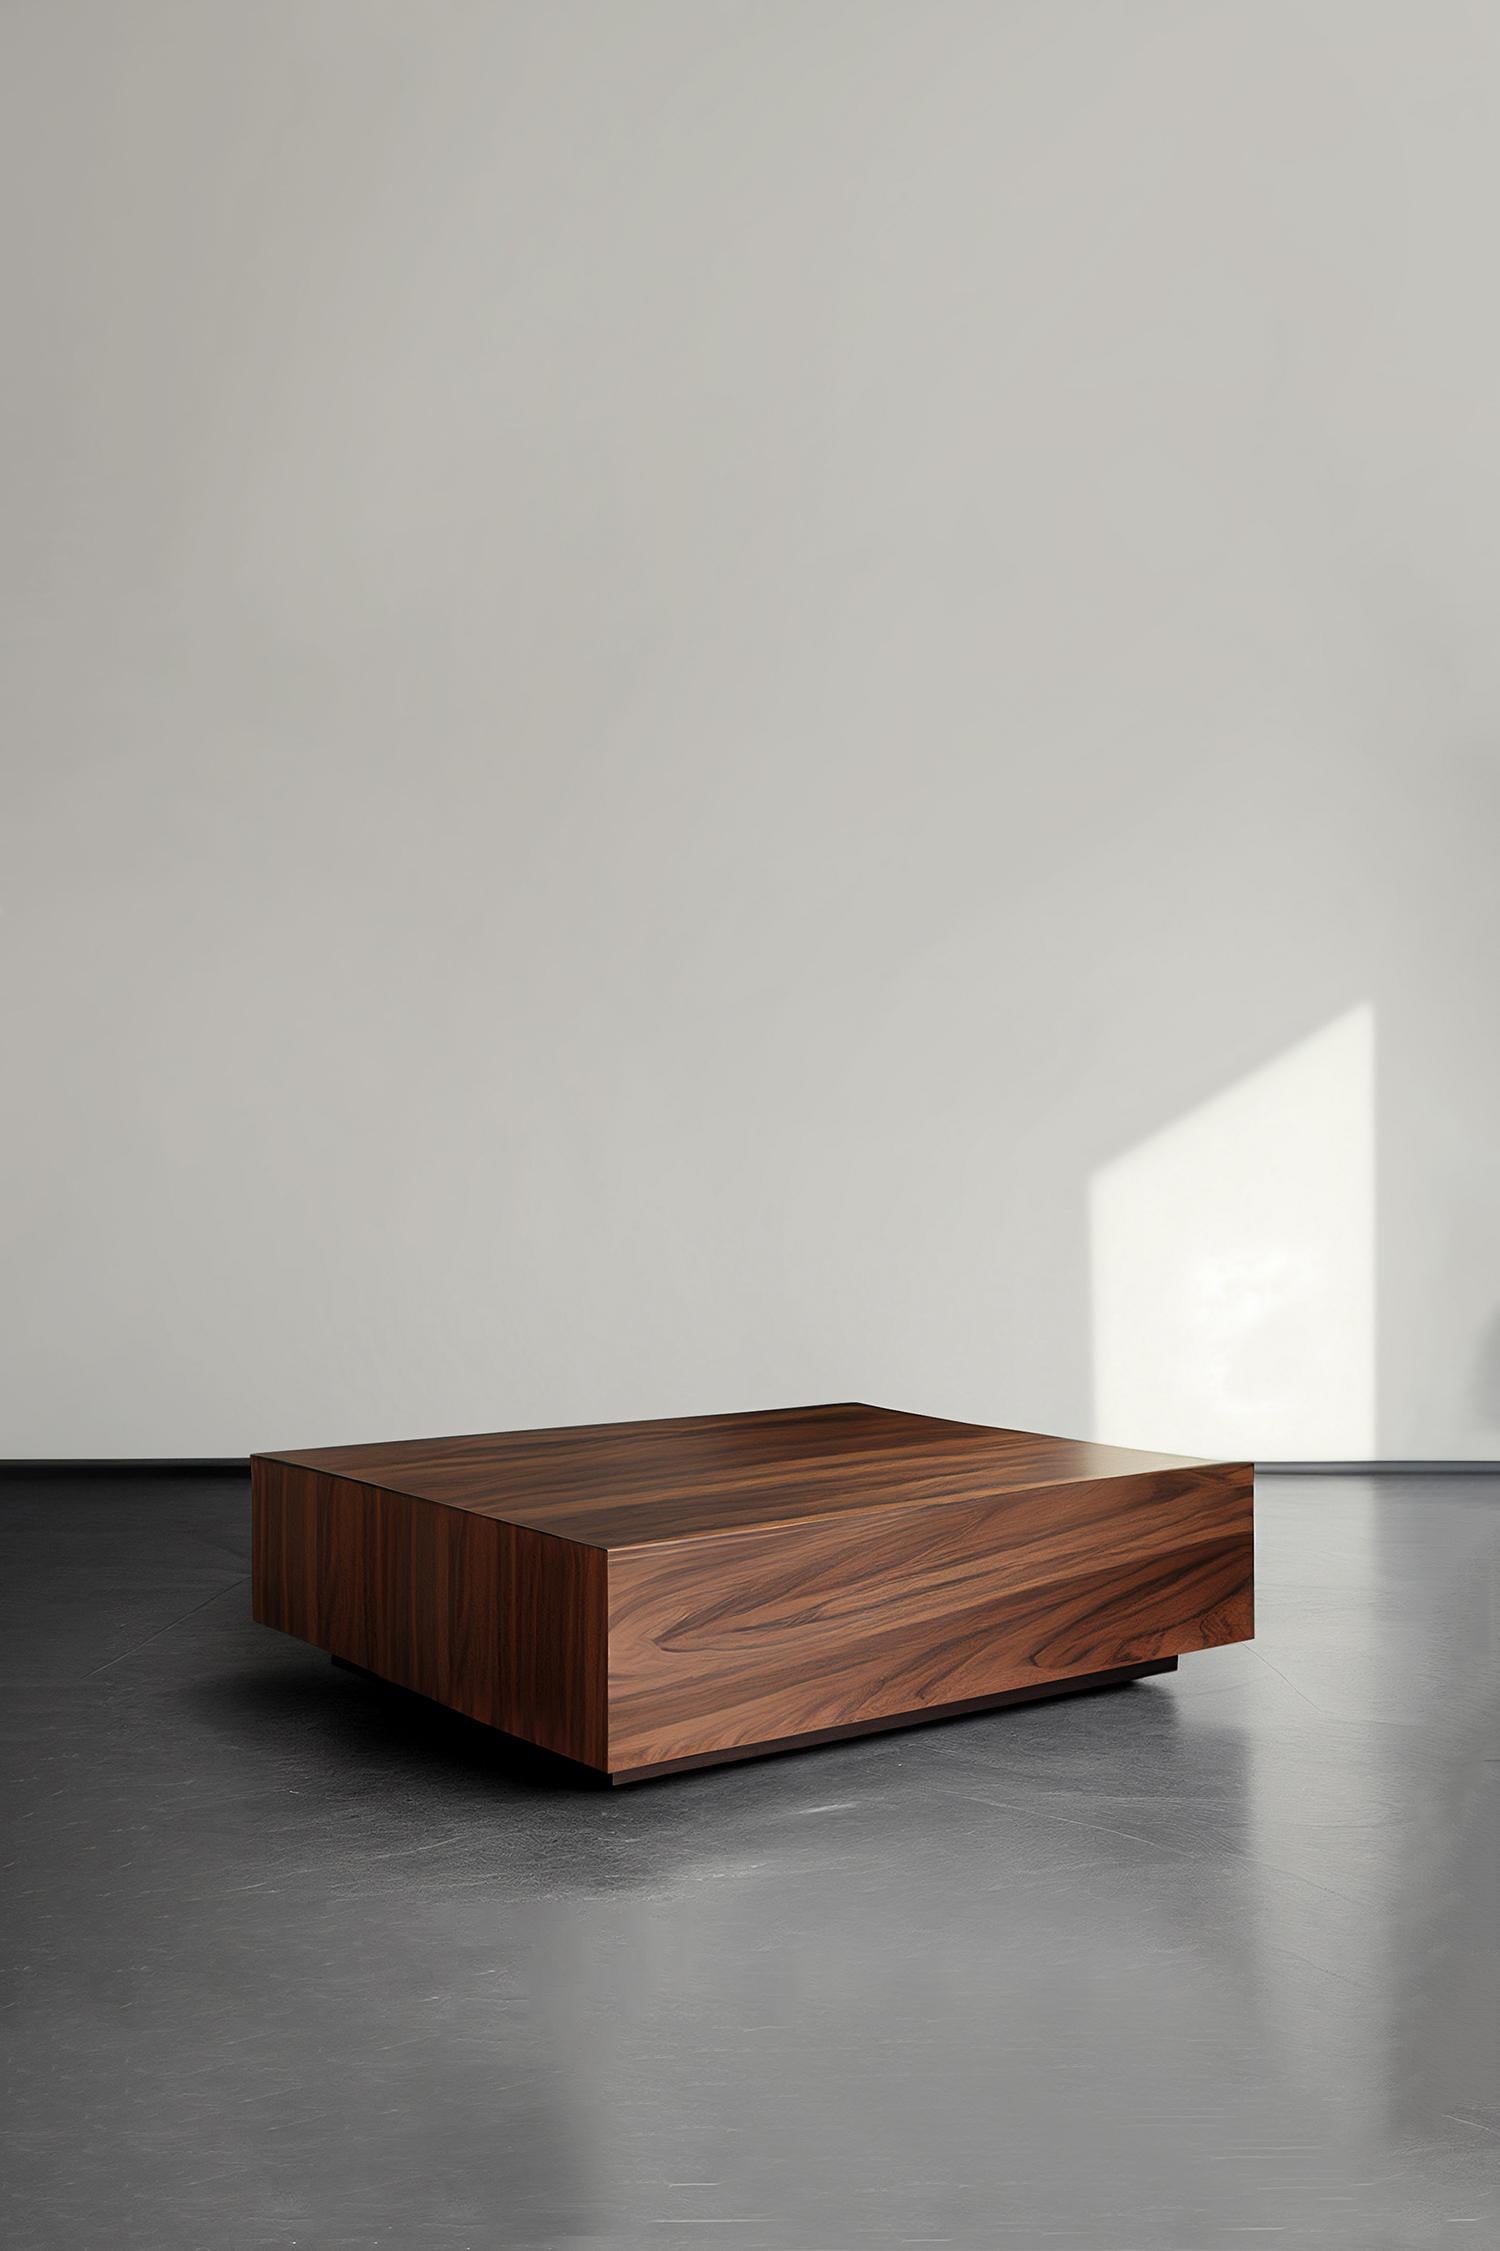 Geometric coffee table, walnut Veneer, Basa by NONO

Square coffee table finished with premium wood veneer, structured with particle board. Finishes available in light oak, walnut, and tinted in gray and black.

The Basa Coffee Table designed by the